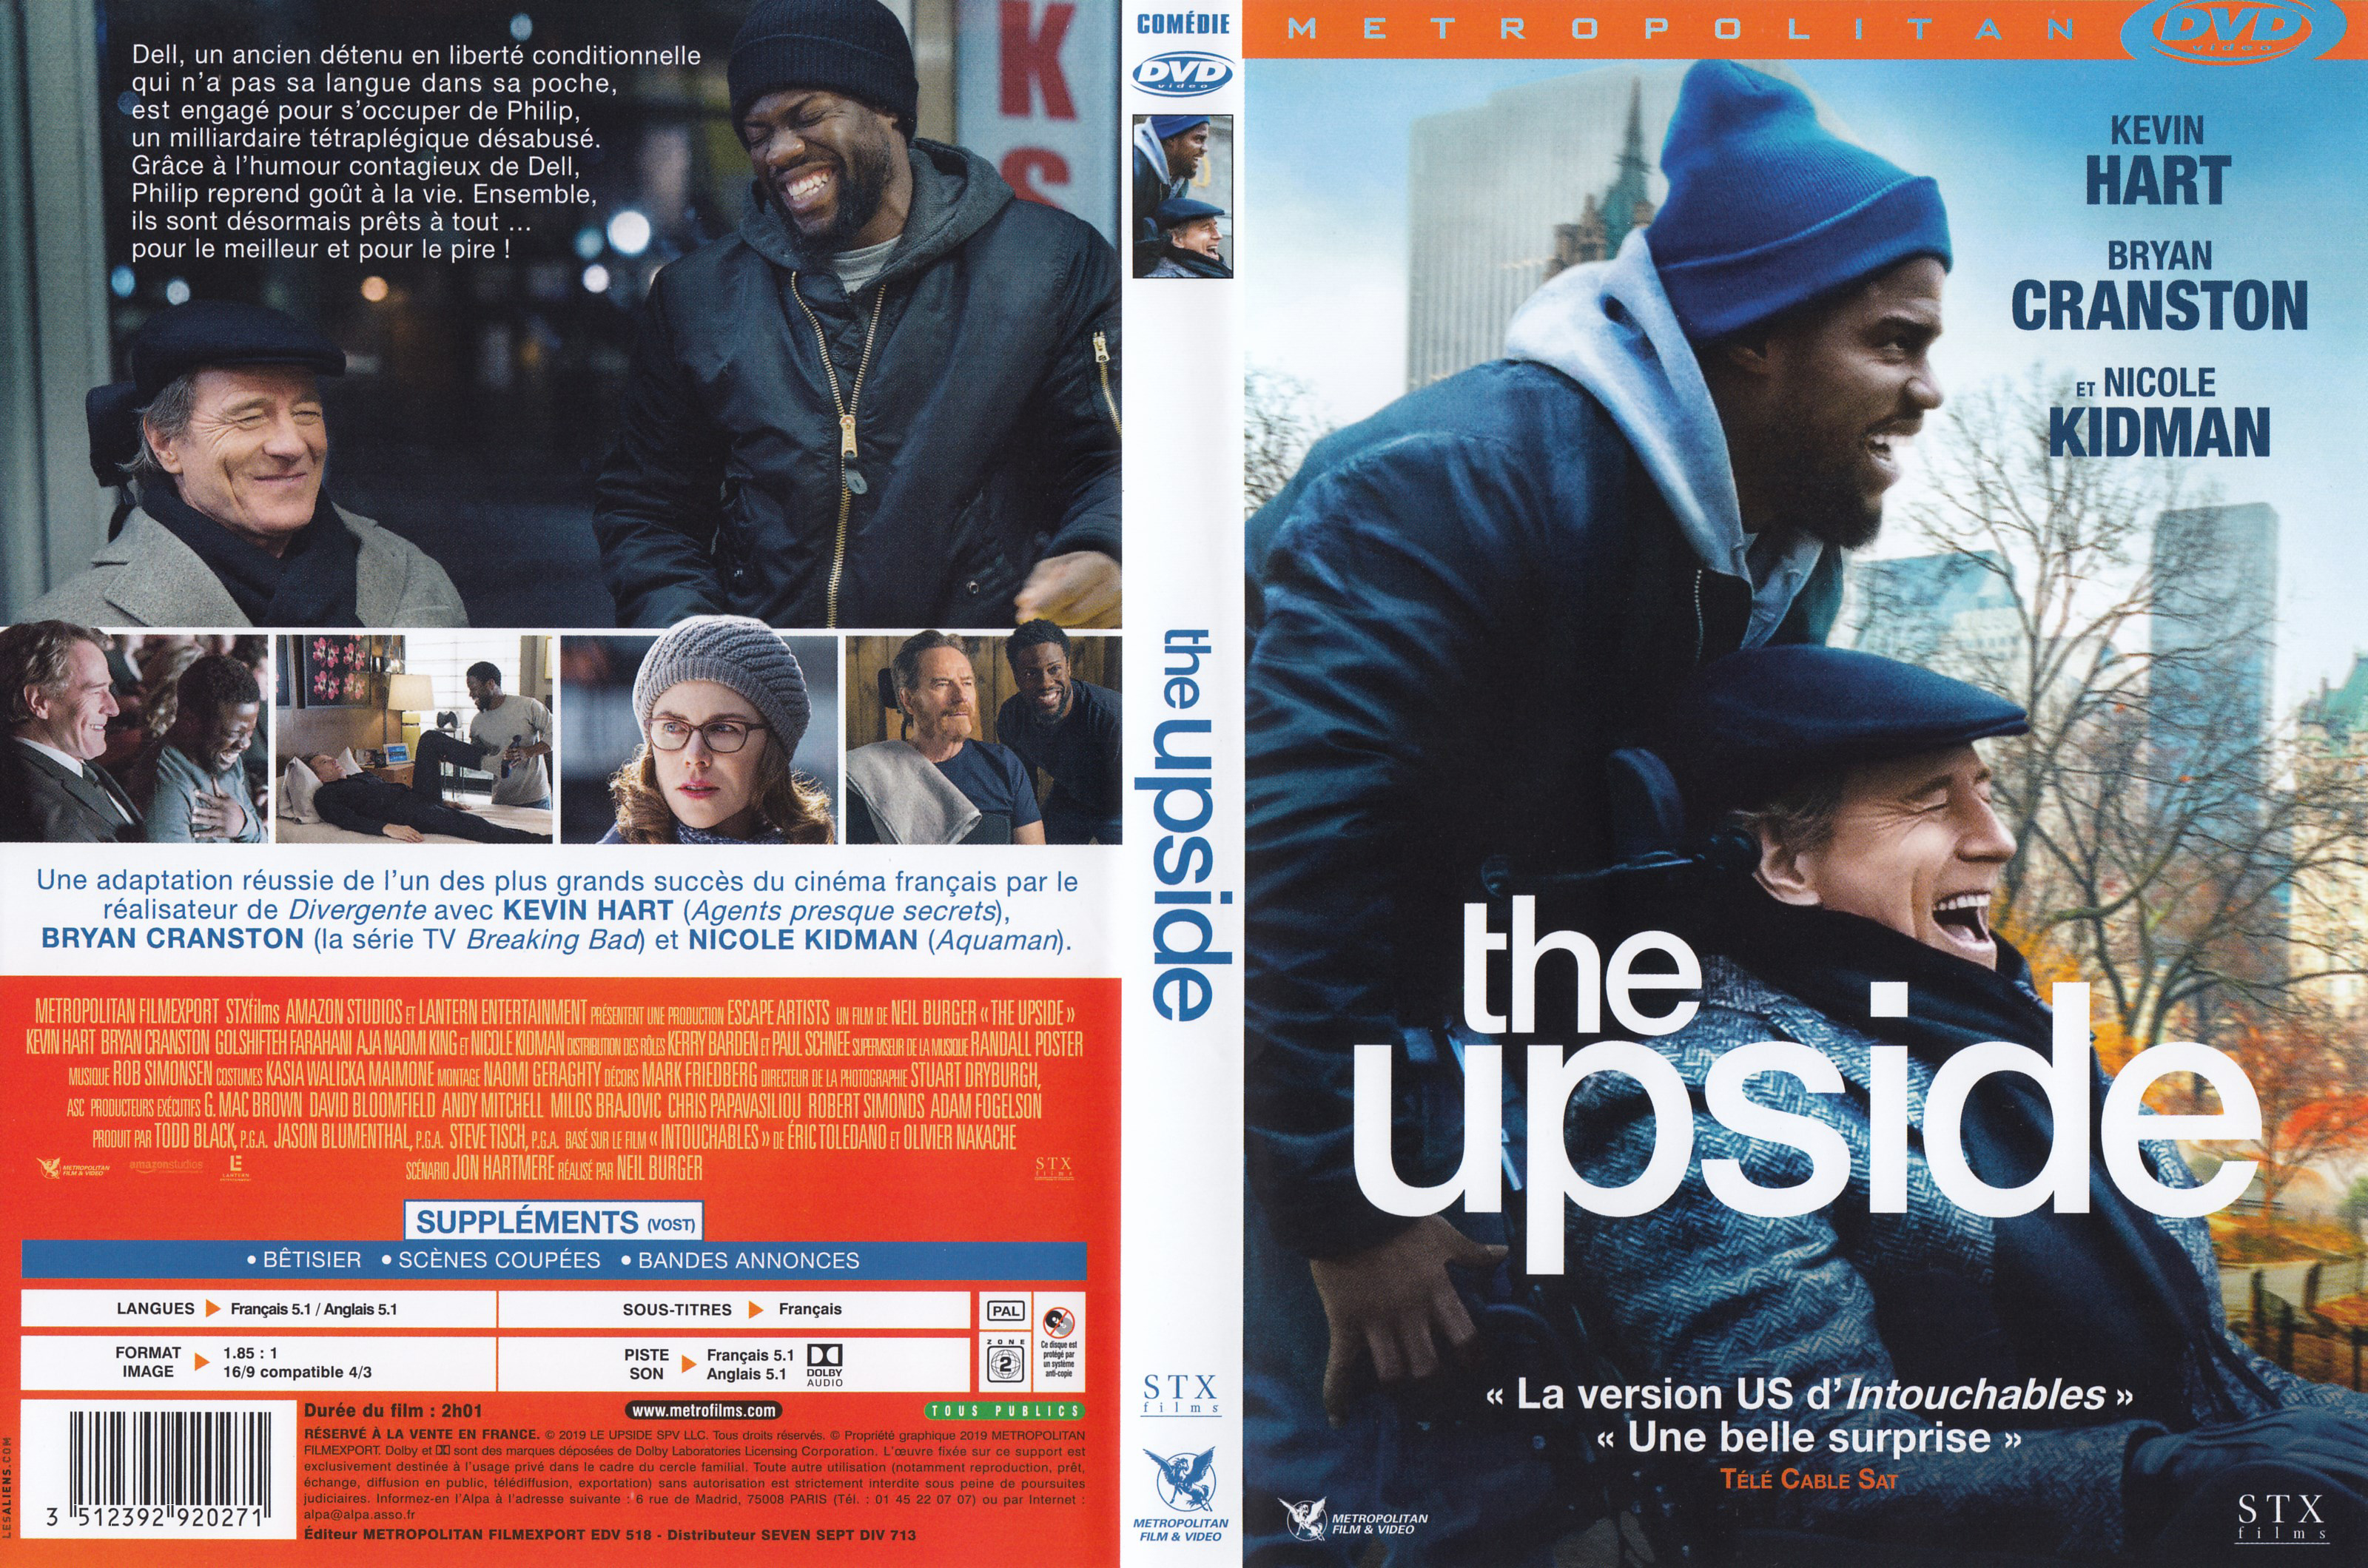 Jaquette DVD The upside